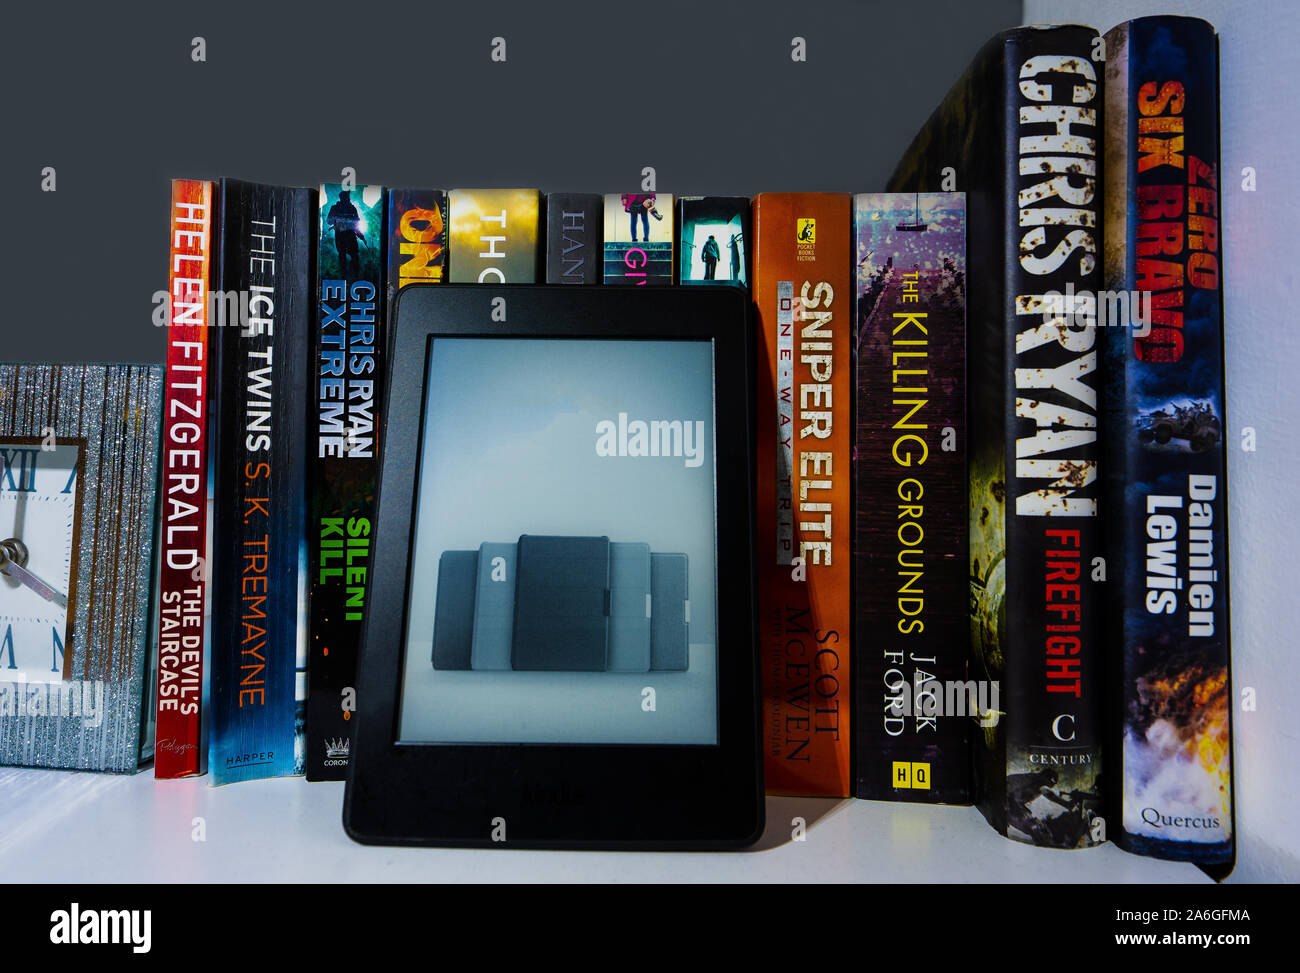 An Ereader Kindle Full Of Ebooks On A Bookshelf Surrounded By